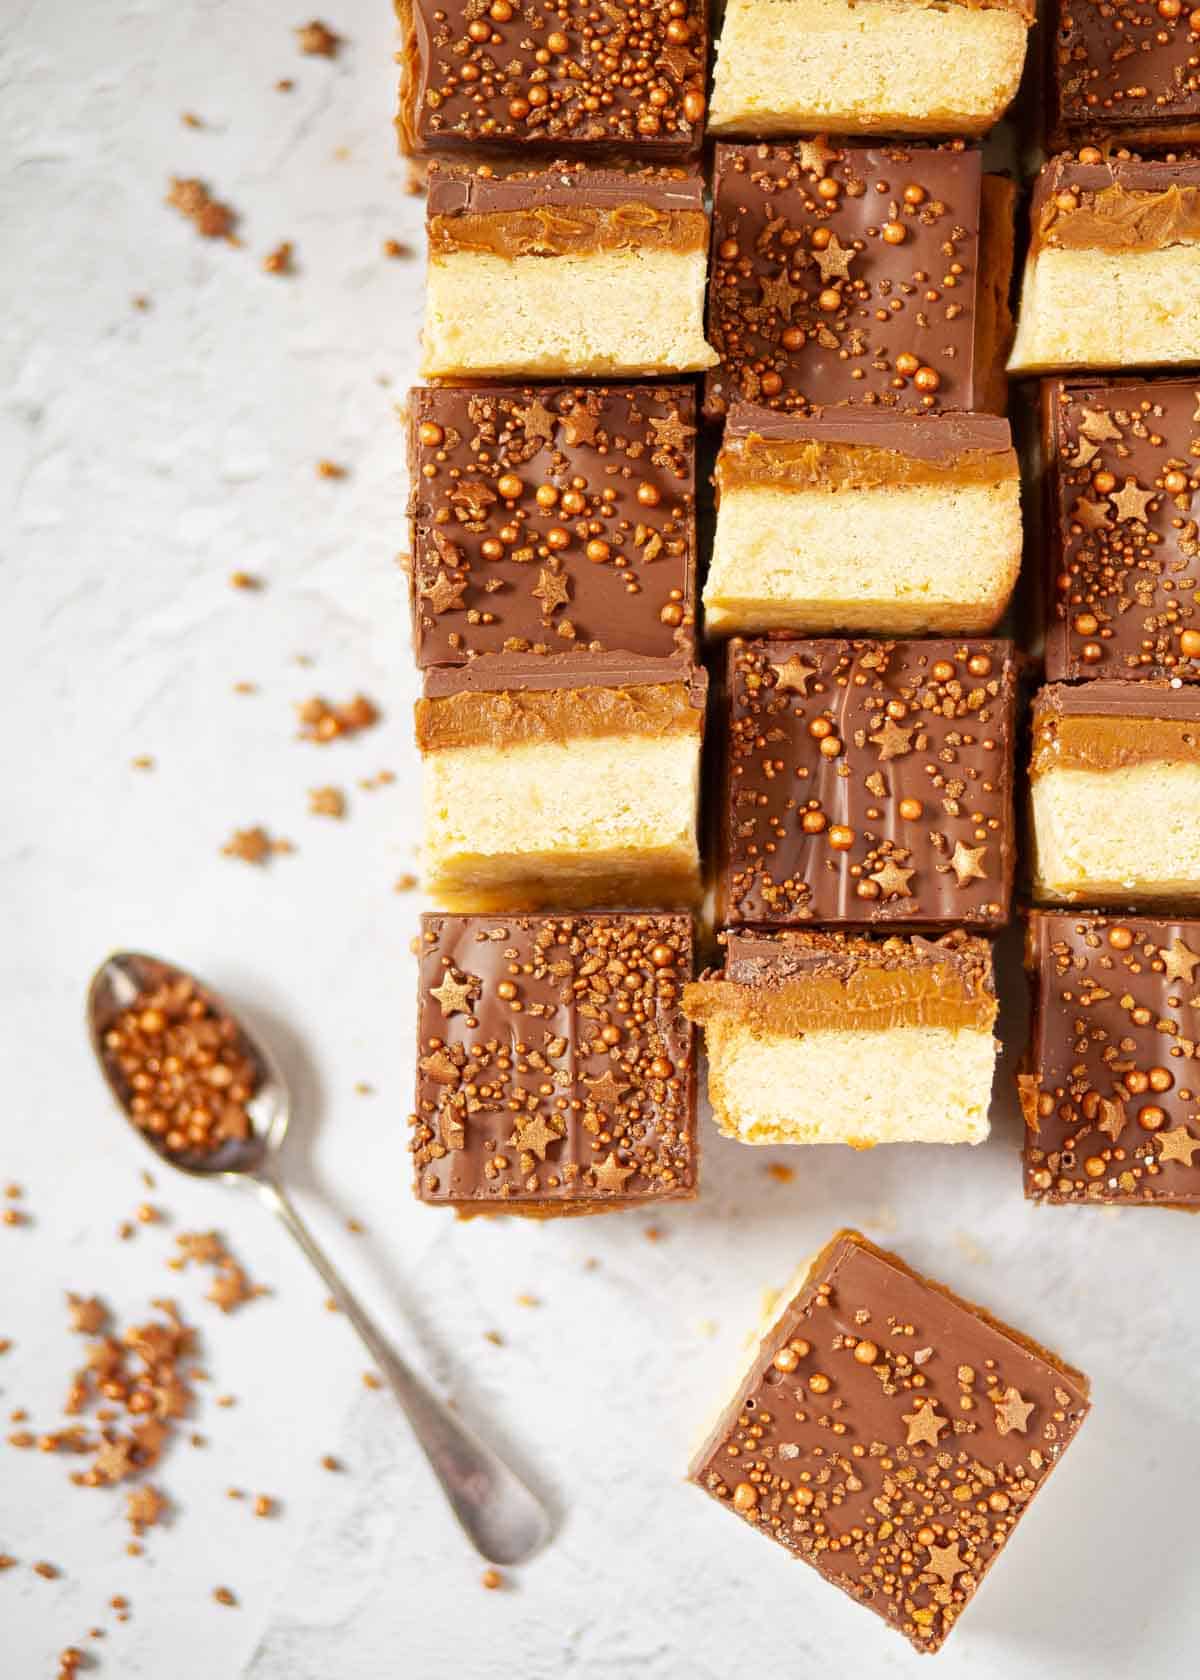 Biscoff traybake slices with a shortbread base, Biscoff spread centre and chocolate top garnished with sprinkles.